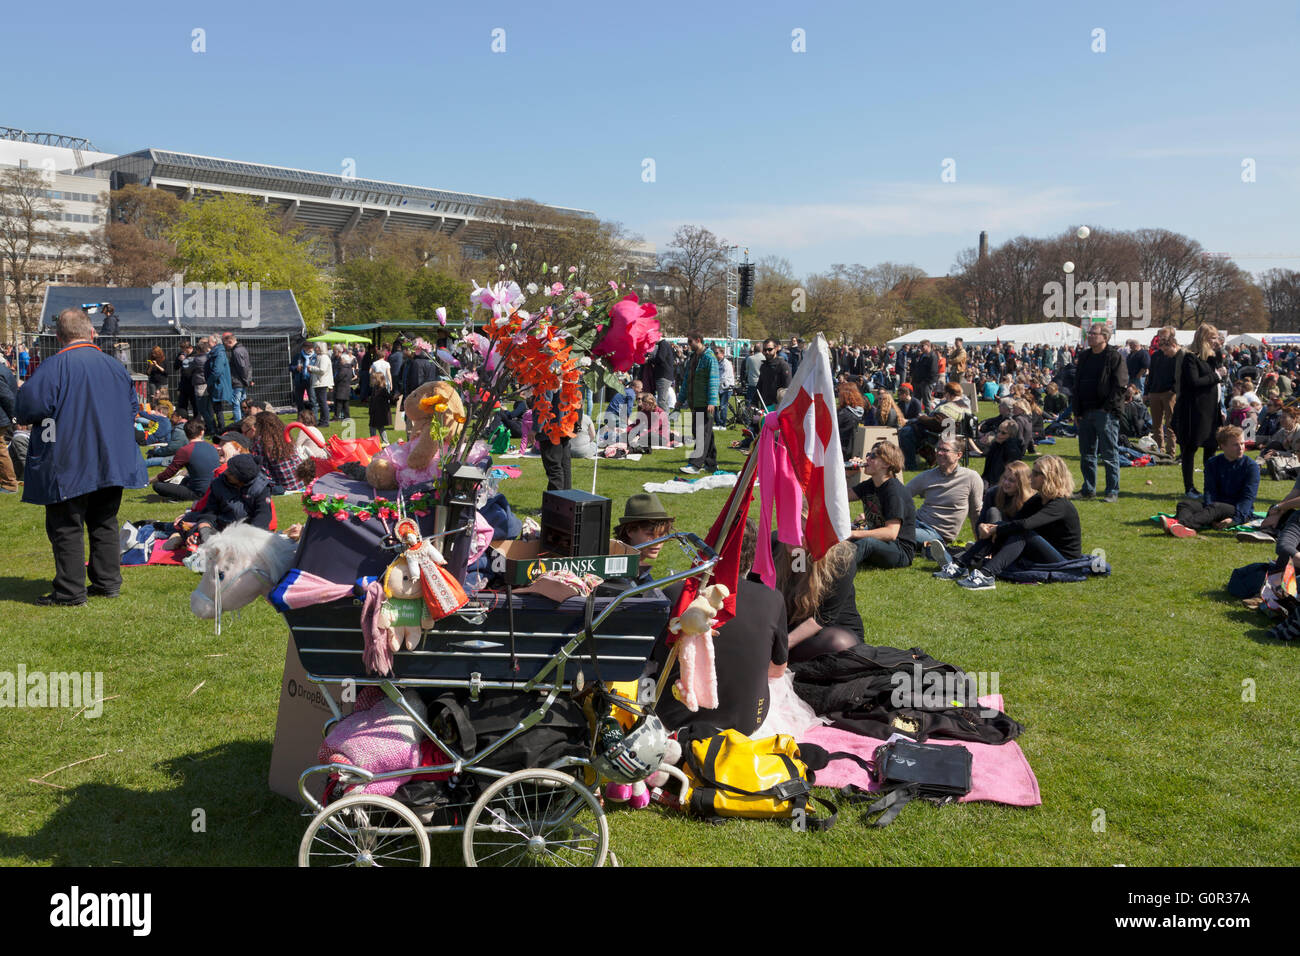 The International Workers’ Day, Labour Day, in Faelledparken, the Copenhagen Common. Speeches, entertainment, picnicking. Stock Photo